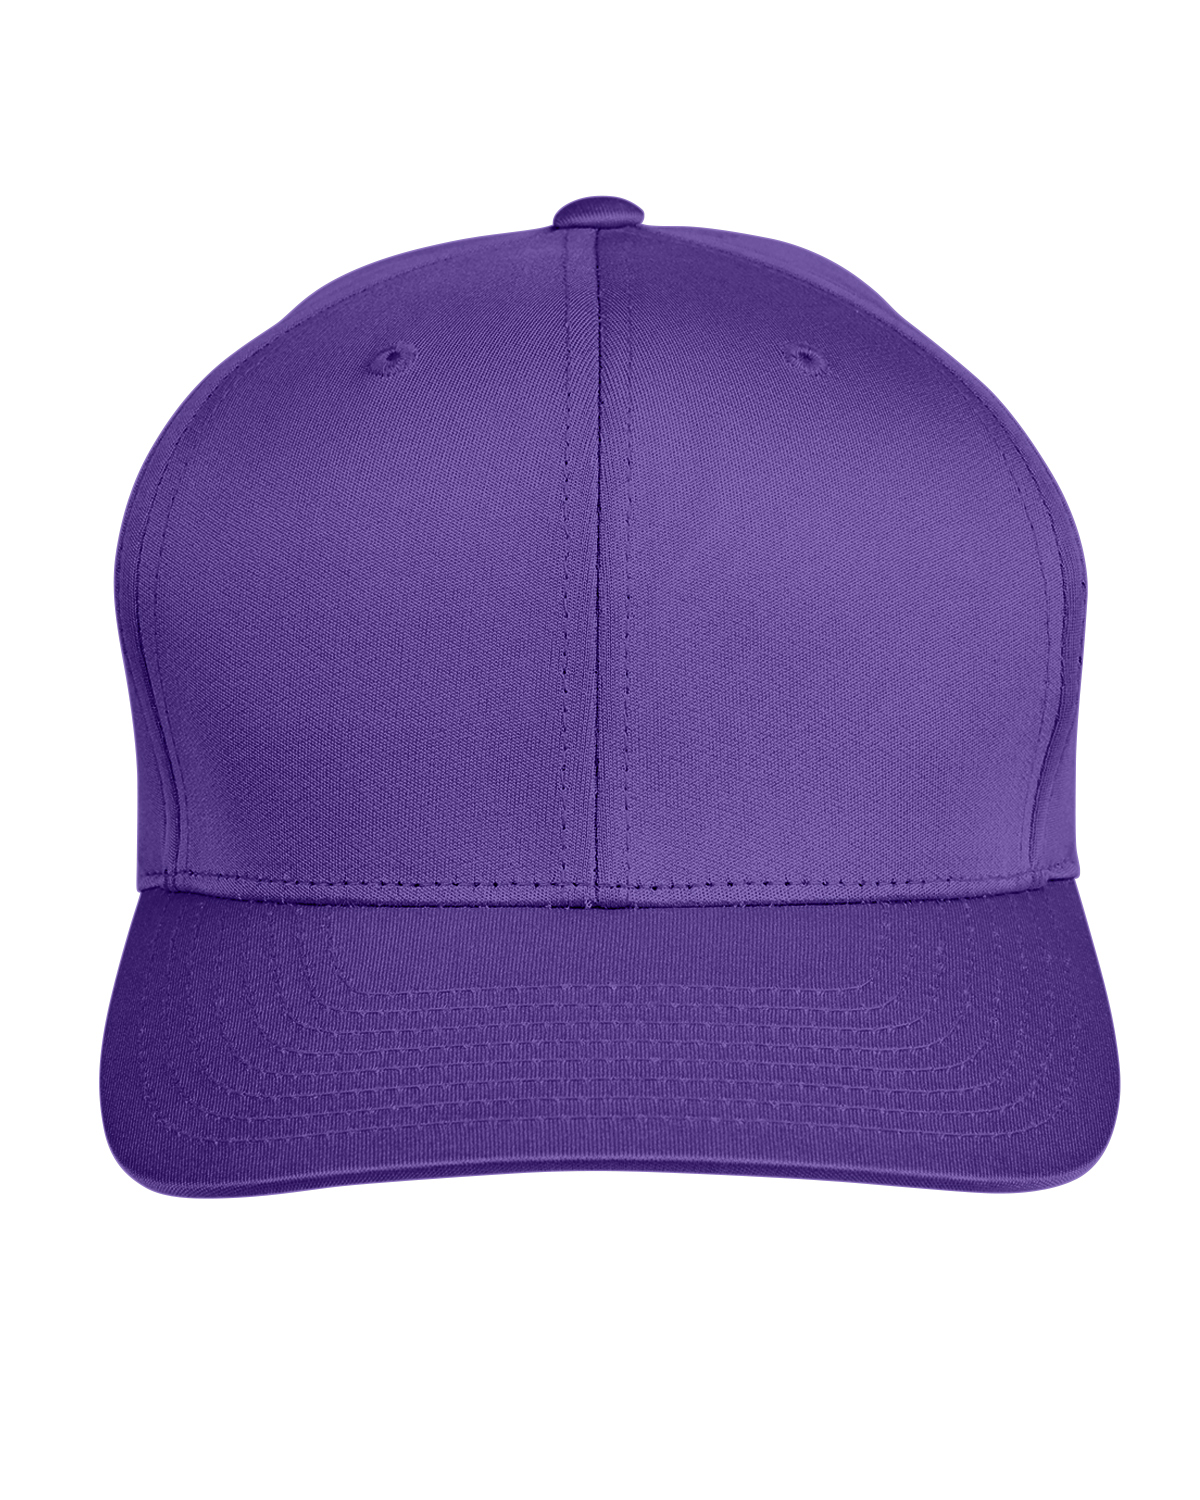 click to view SPORT PURPLE